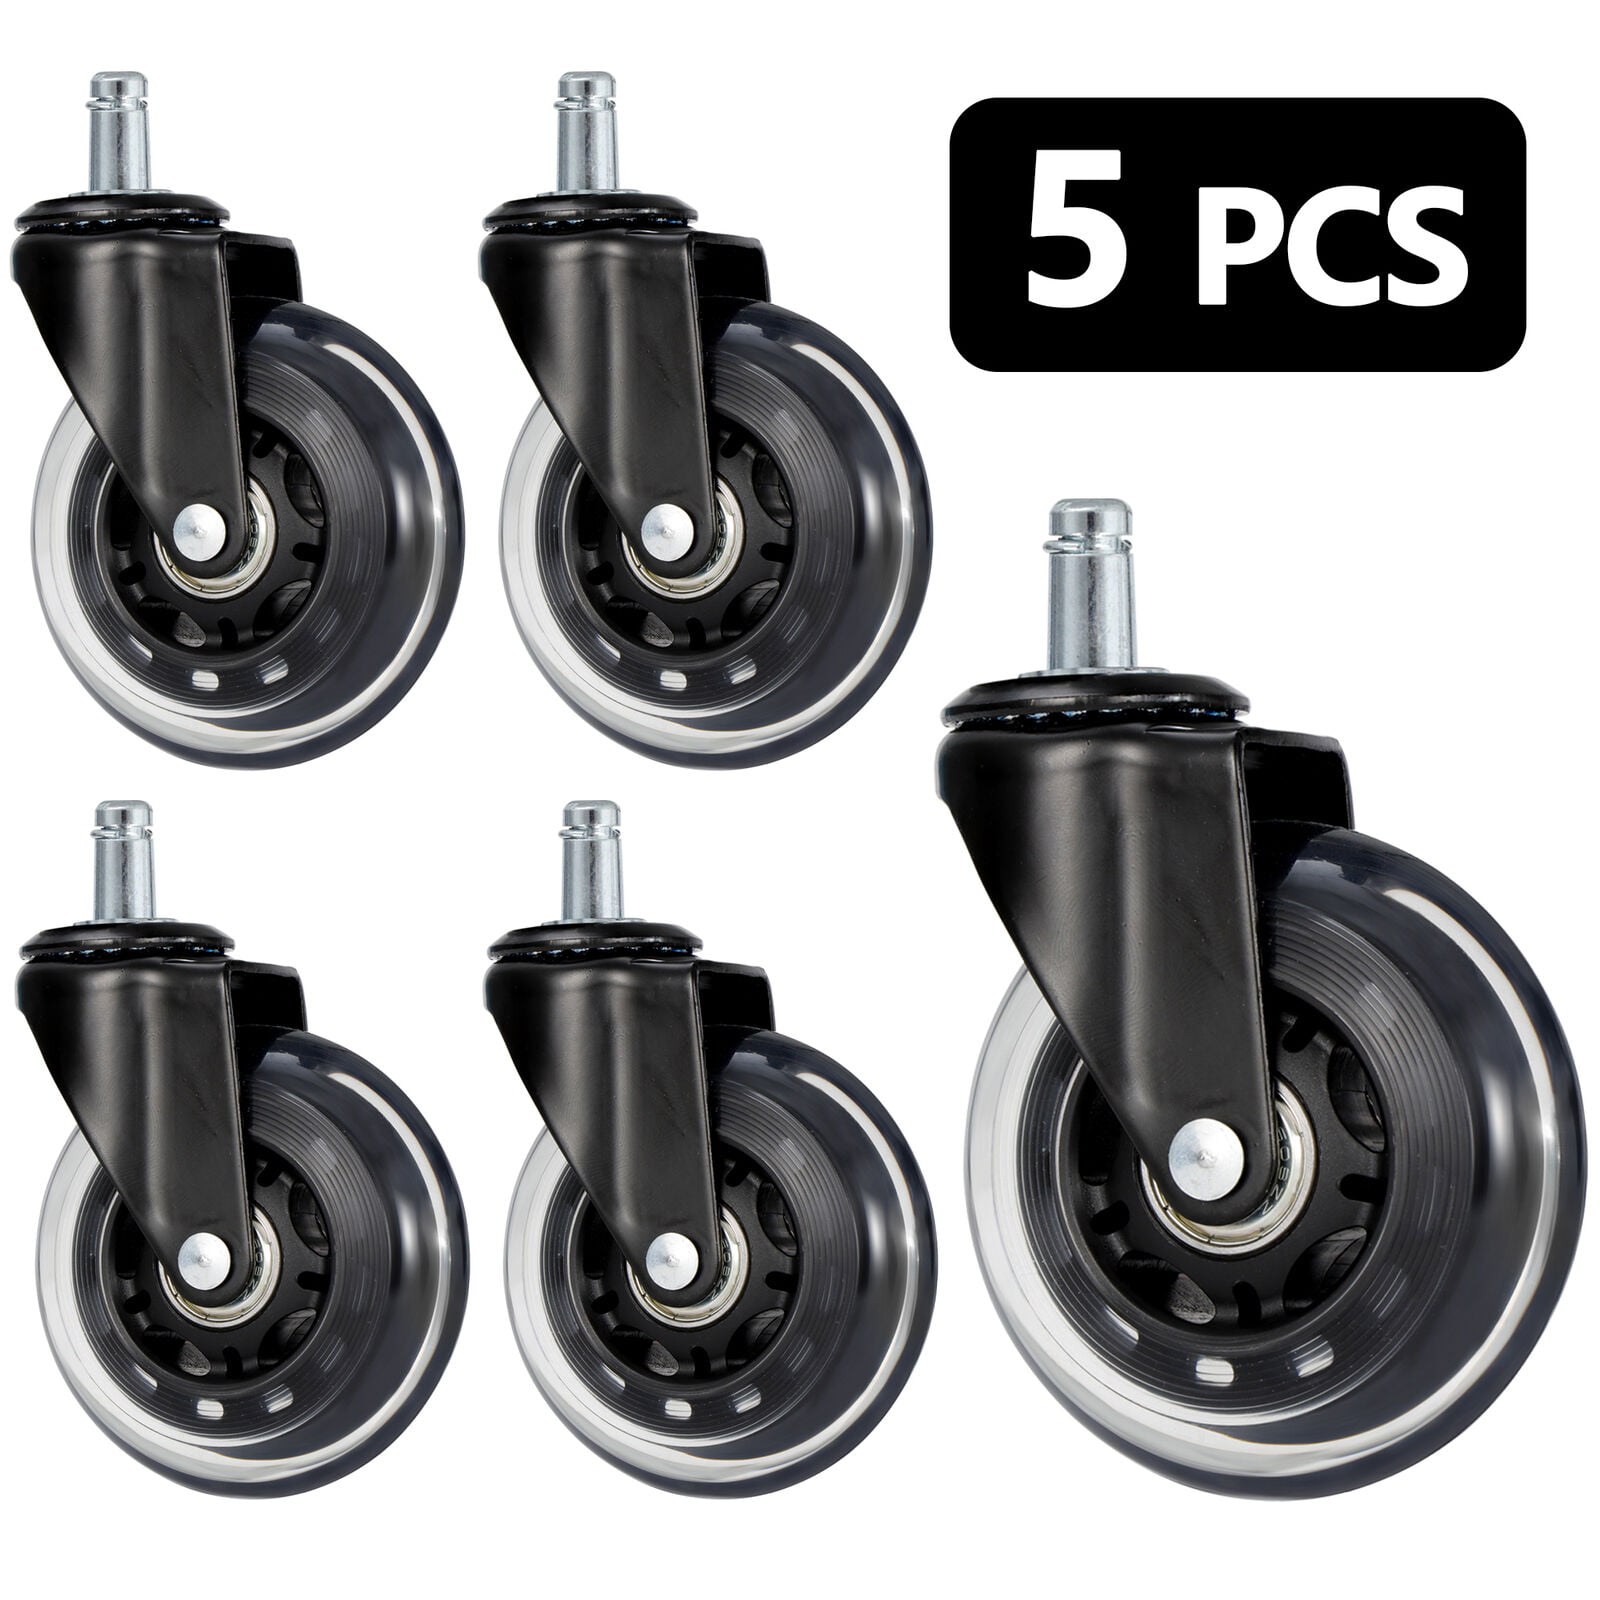 1 Replacement Swivel Roller Caster Wheels For Office Computer Furniture Desk 